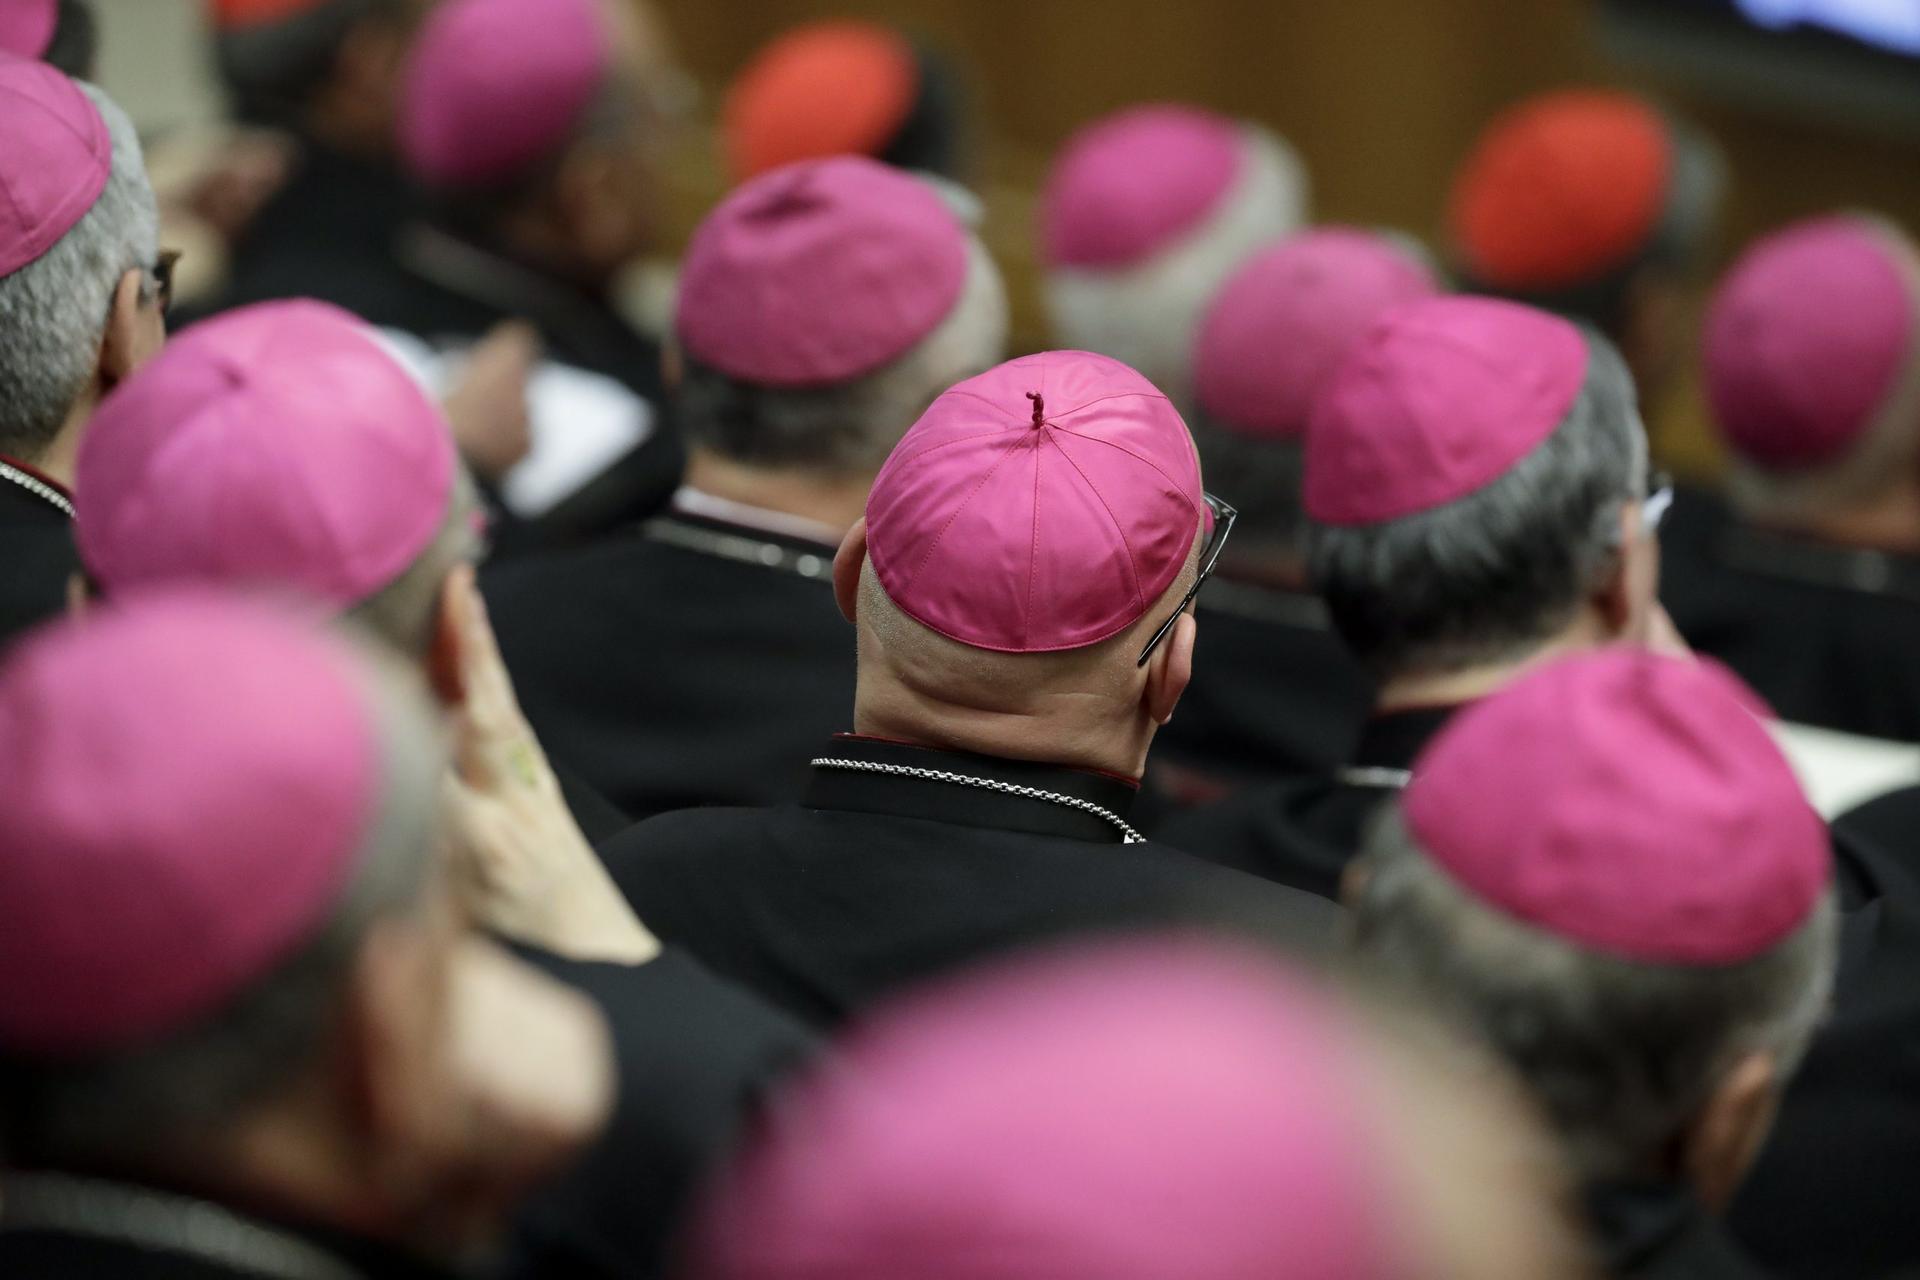 Italian bishops decree ‘moral obligation’ to report abuse to police